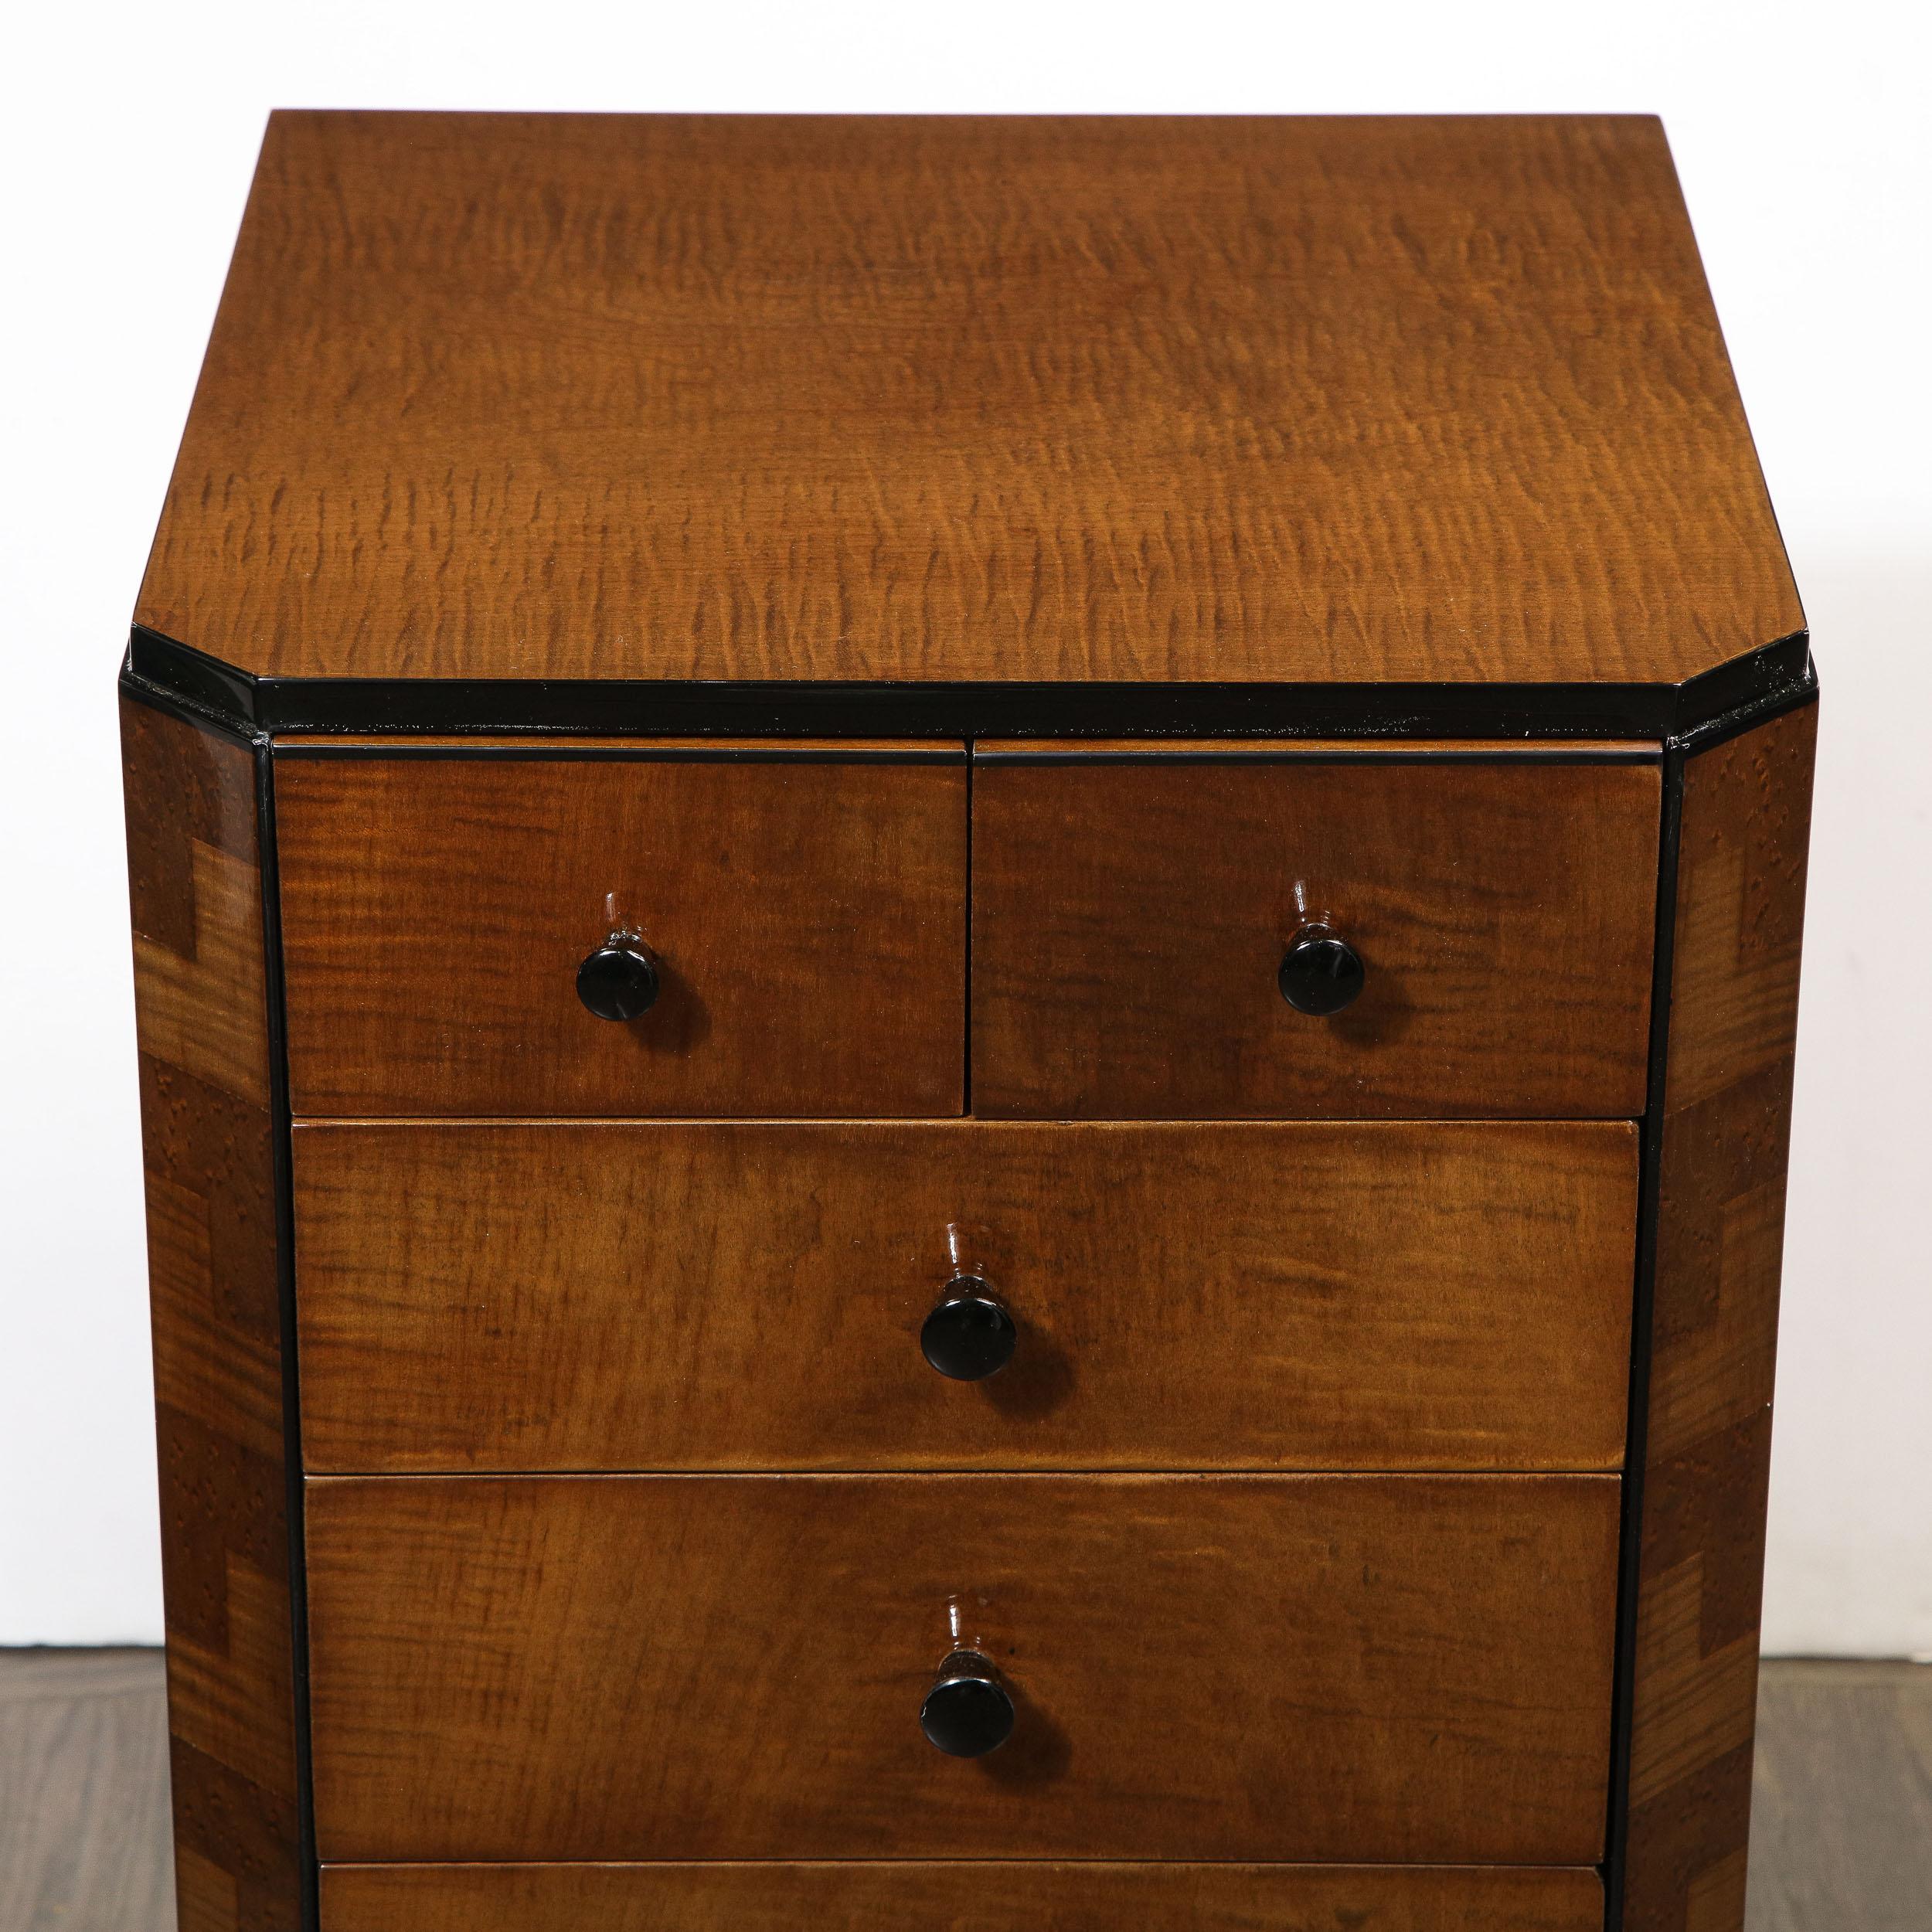 American Pair of Art Deco Bookmatched Amboyna & Burled Elm Nightstands with Cubist Detail